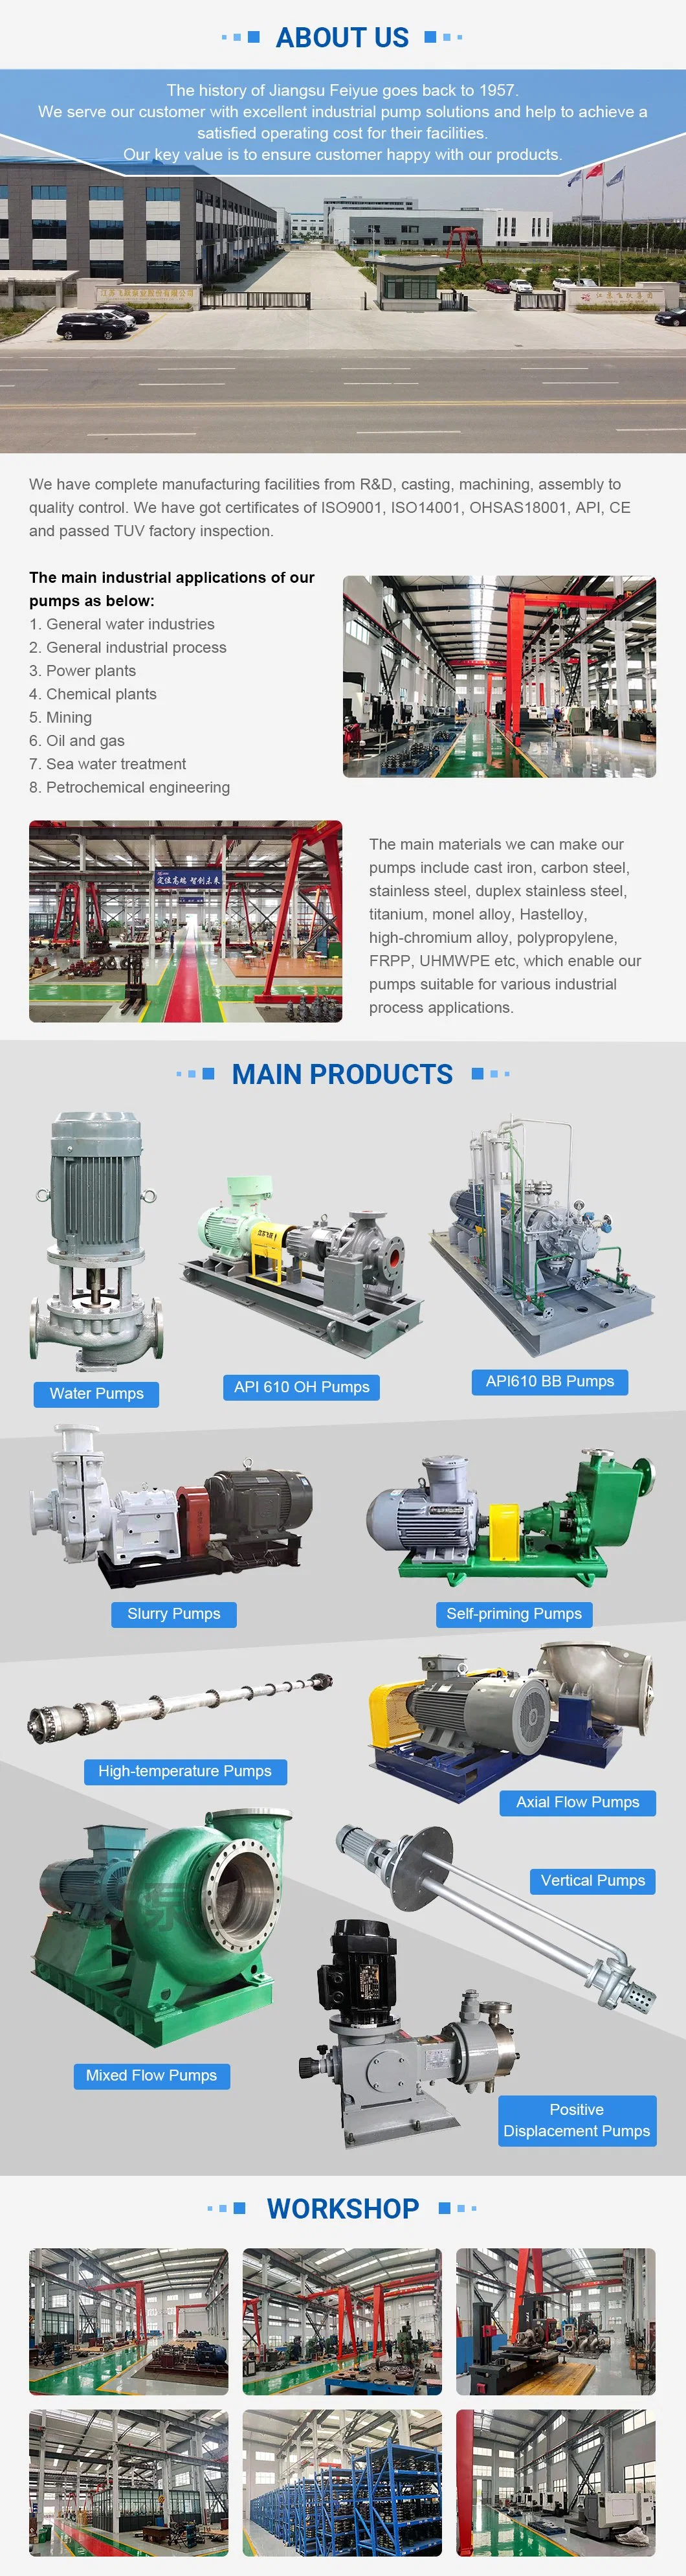 Fzb Horizontal Lining/Lined Centrifugal Chemical Process Pump for Barrel Sulfuric Acid Transfer Pump (OH1)